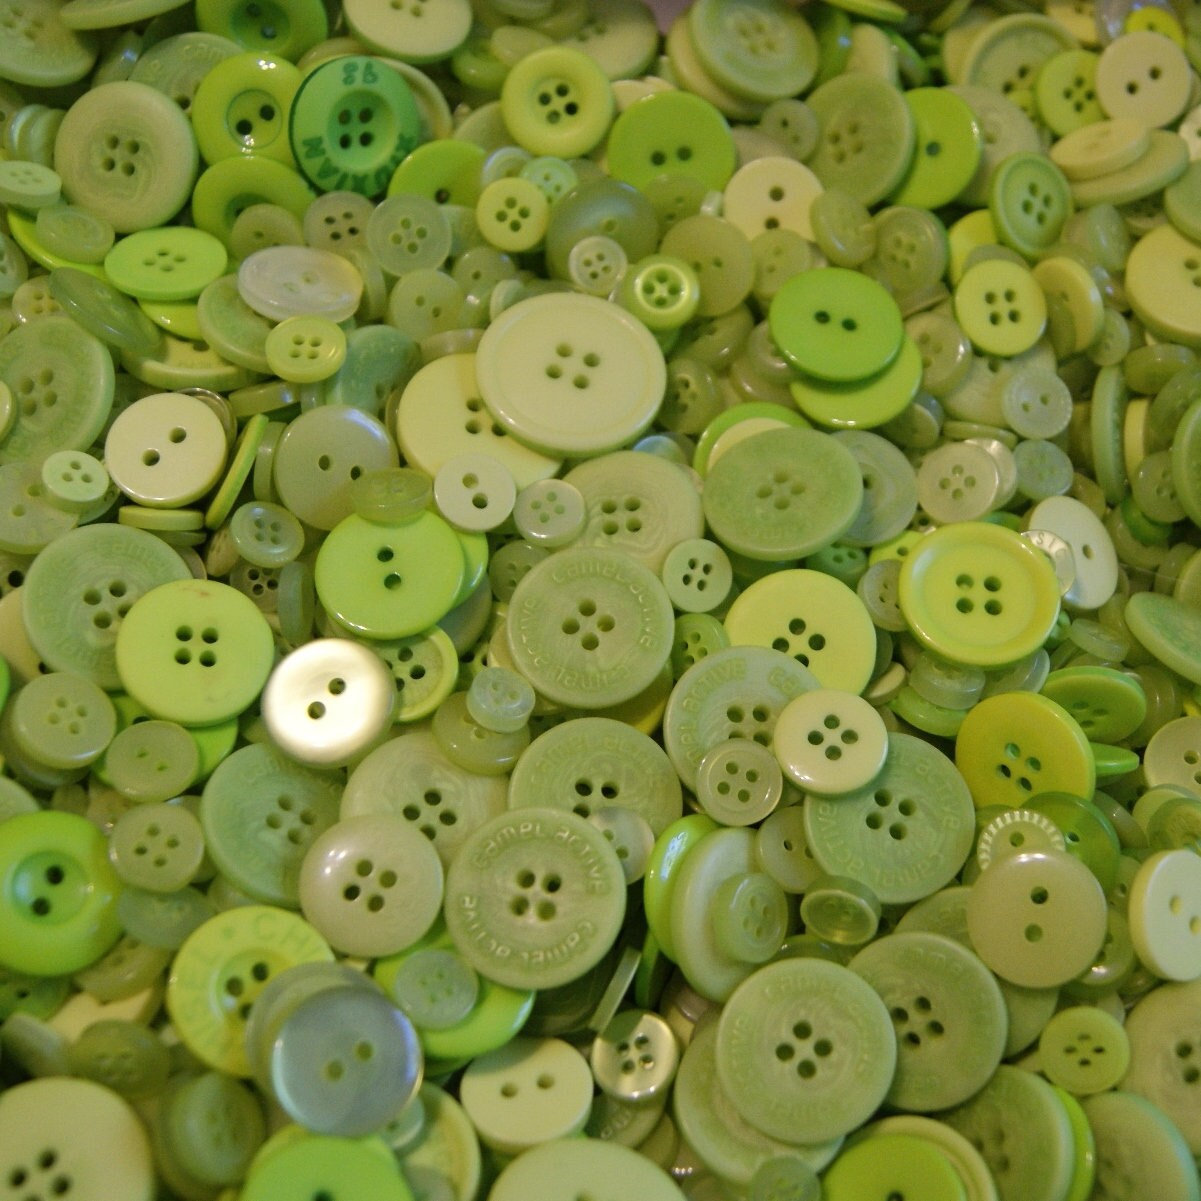 Bright Purple, Lime Green & Orange Buttons for Crafts Sewing Scrapbooks and  Quilts. Assorted sizes including small bright purple, lime green & orange  buttons